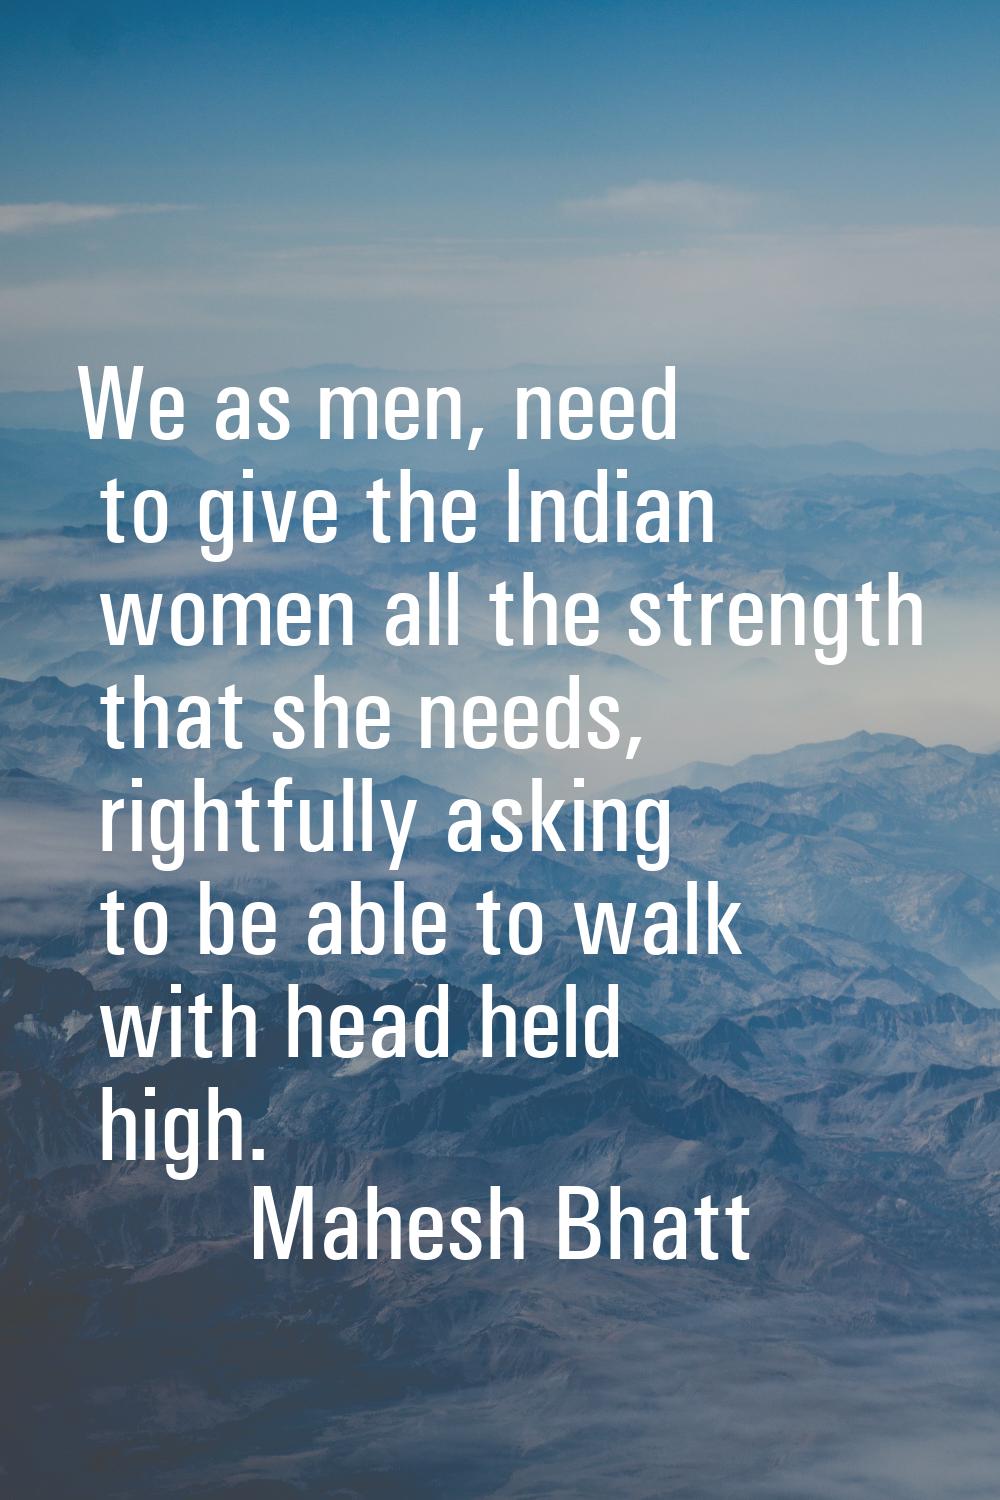 We as men, need to give the Indian women all the strength that she needs, rightfully asking to be a